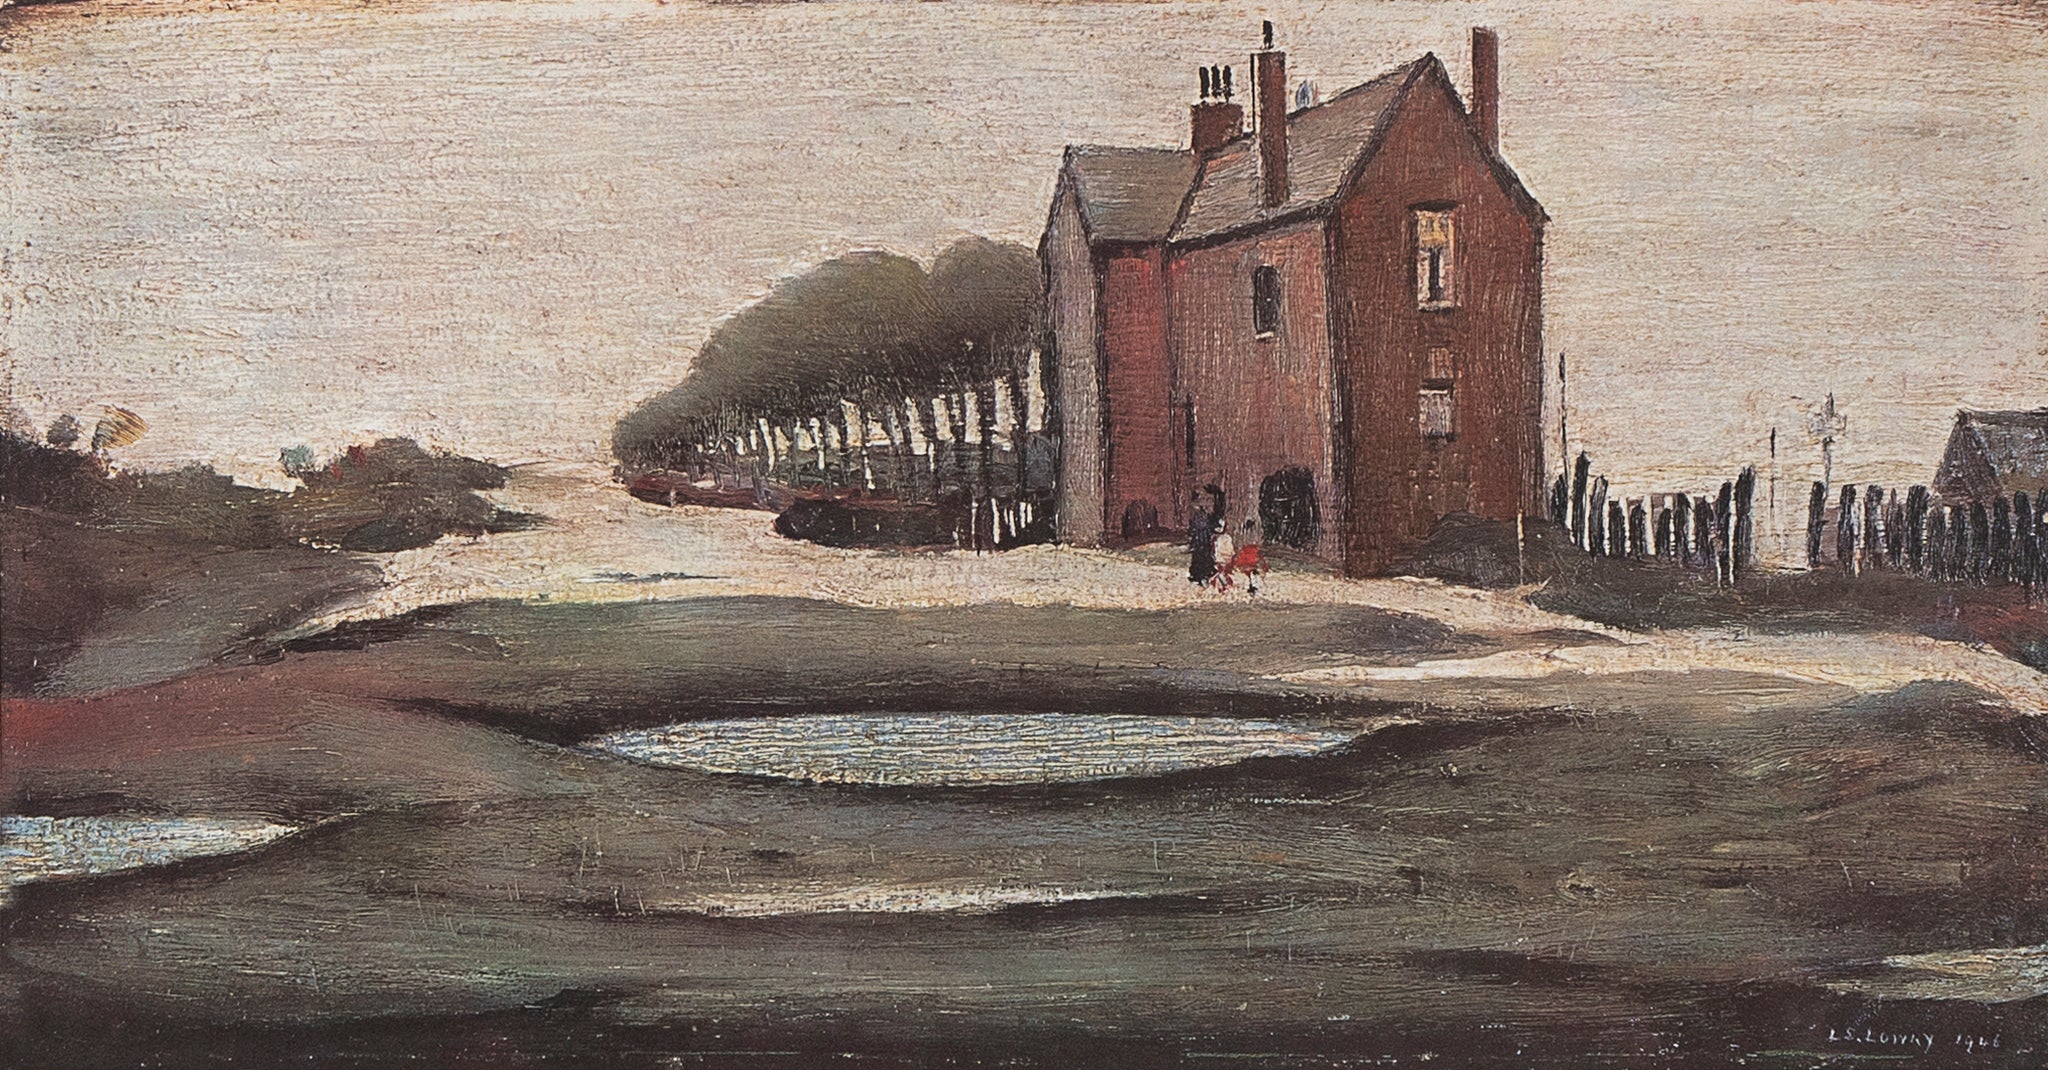 The Life of L.S. Lowry